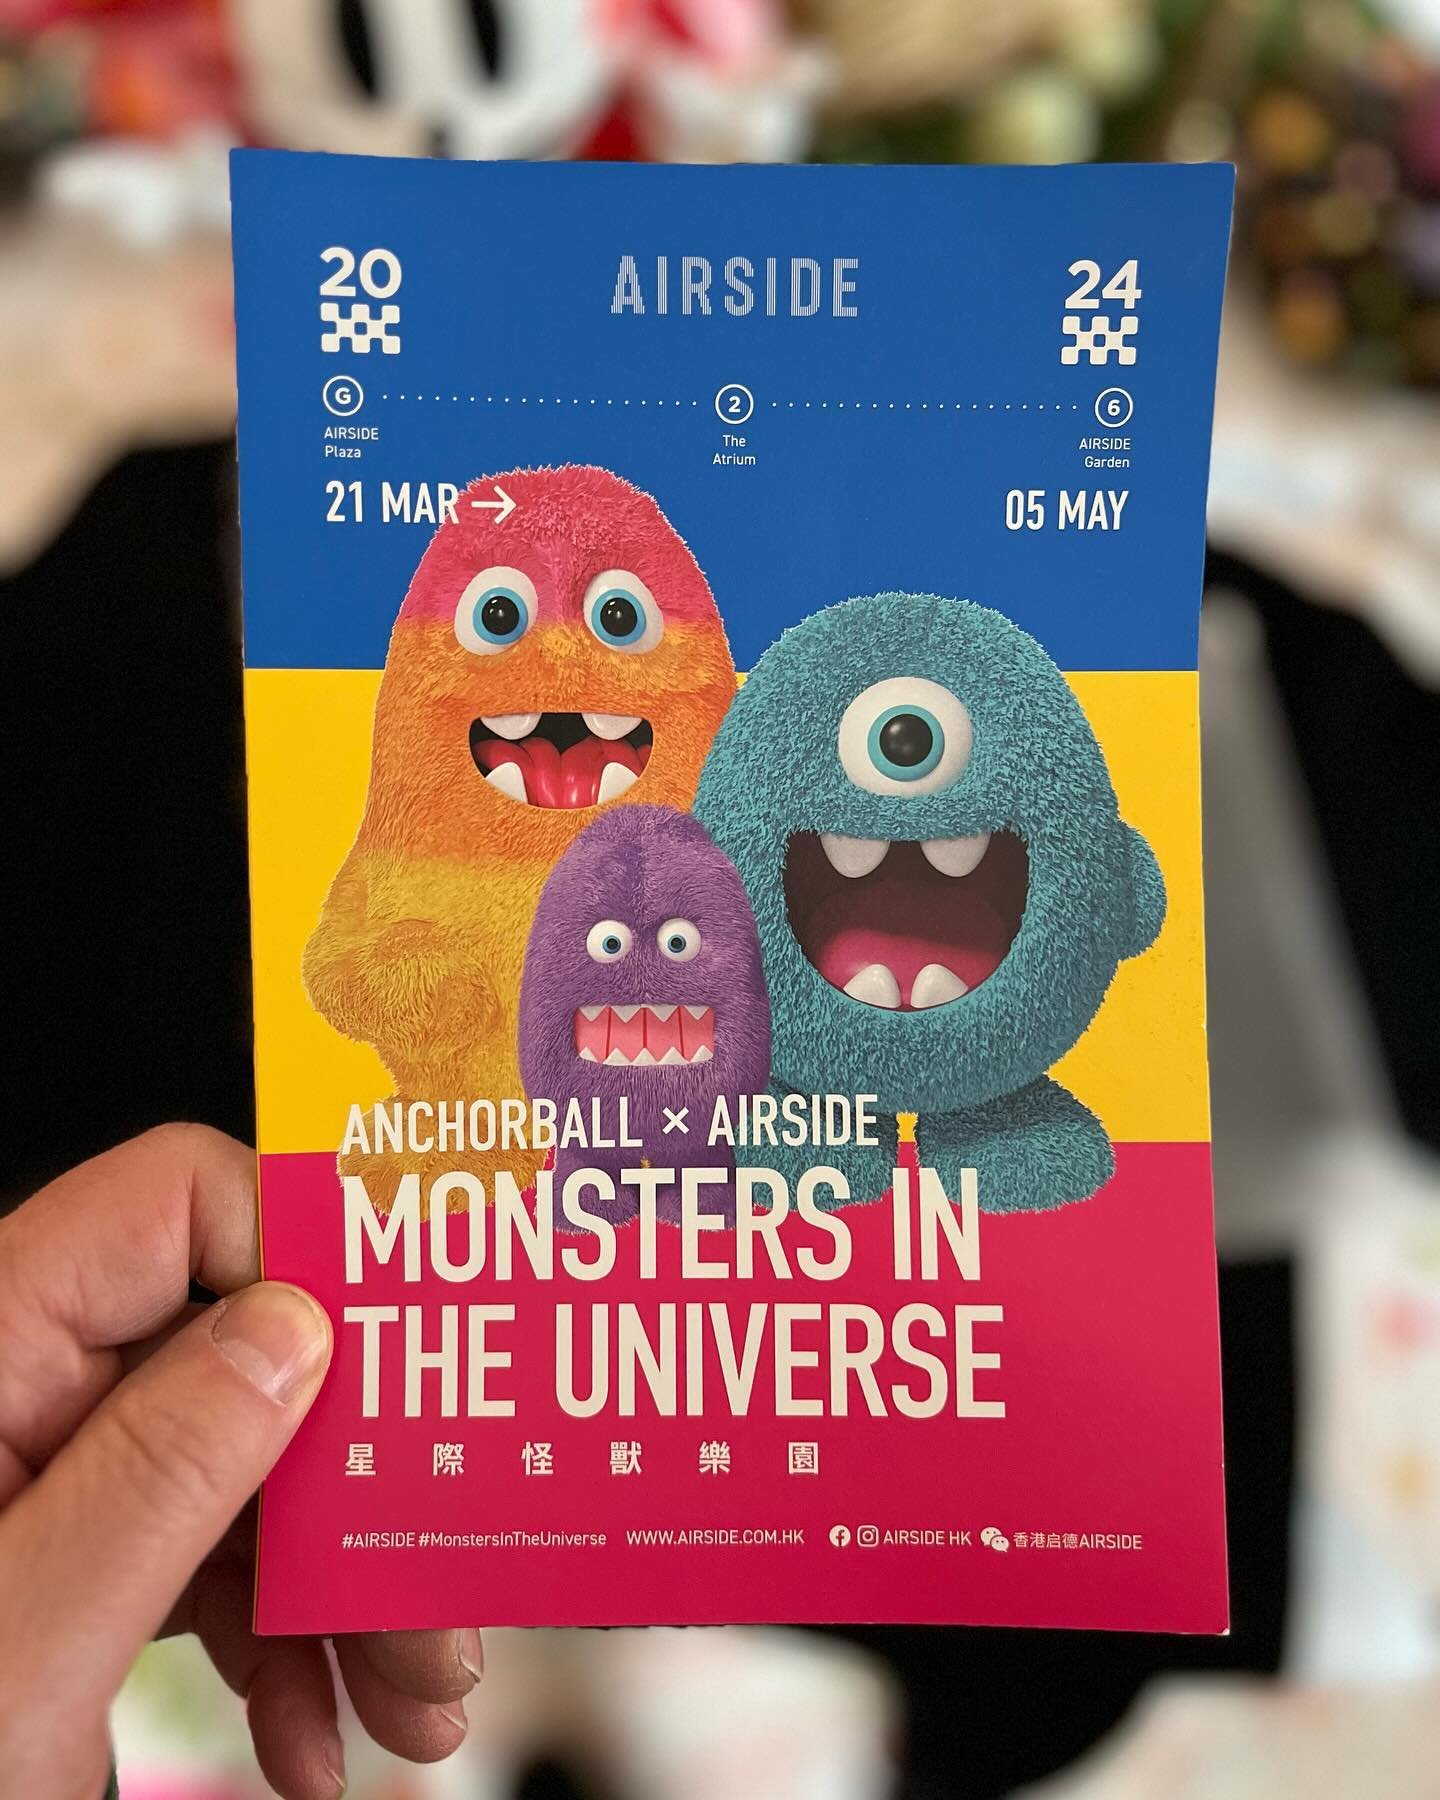 Thank you @joeyngoy and @airsidehk what an amazing show and first step in doing merch with such an amazing art event at @airsidehk in the beautiful city of Hong Kong. Feeling so blessed to see this amazing team, event and merchandise all come togethe